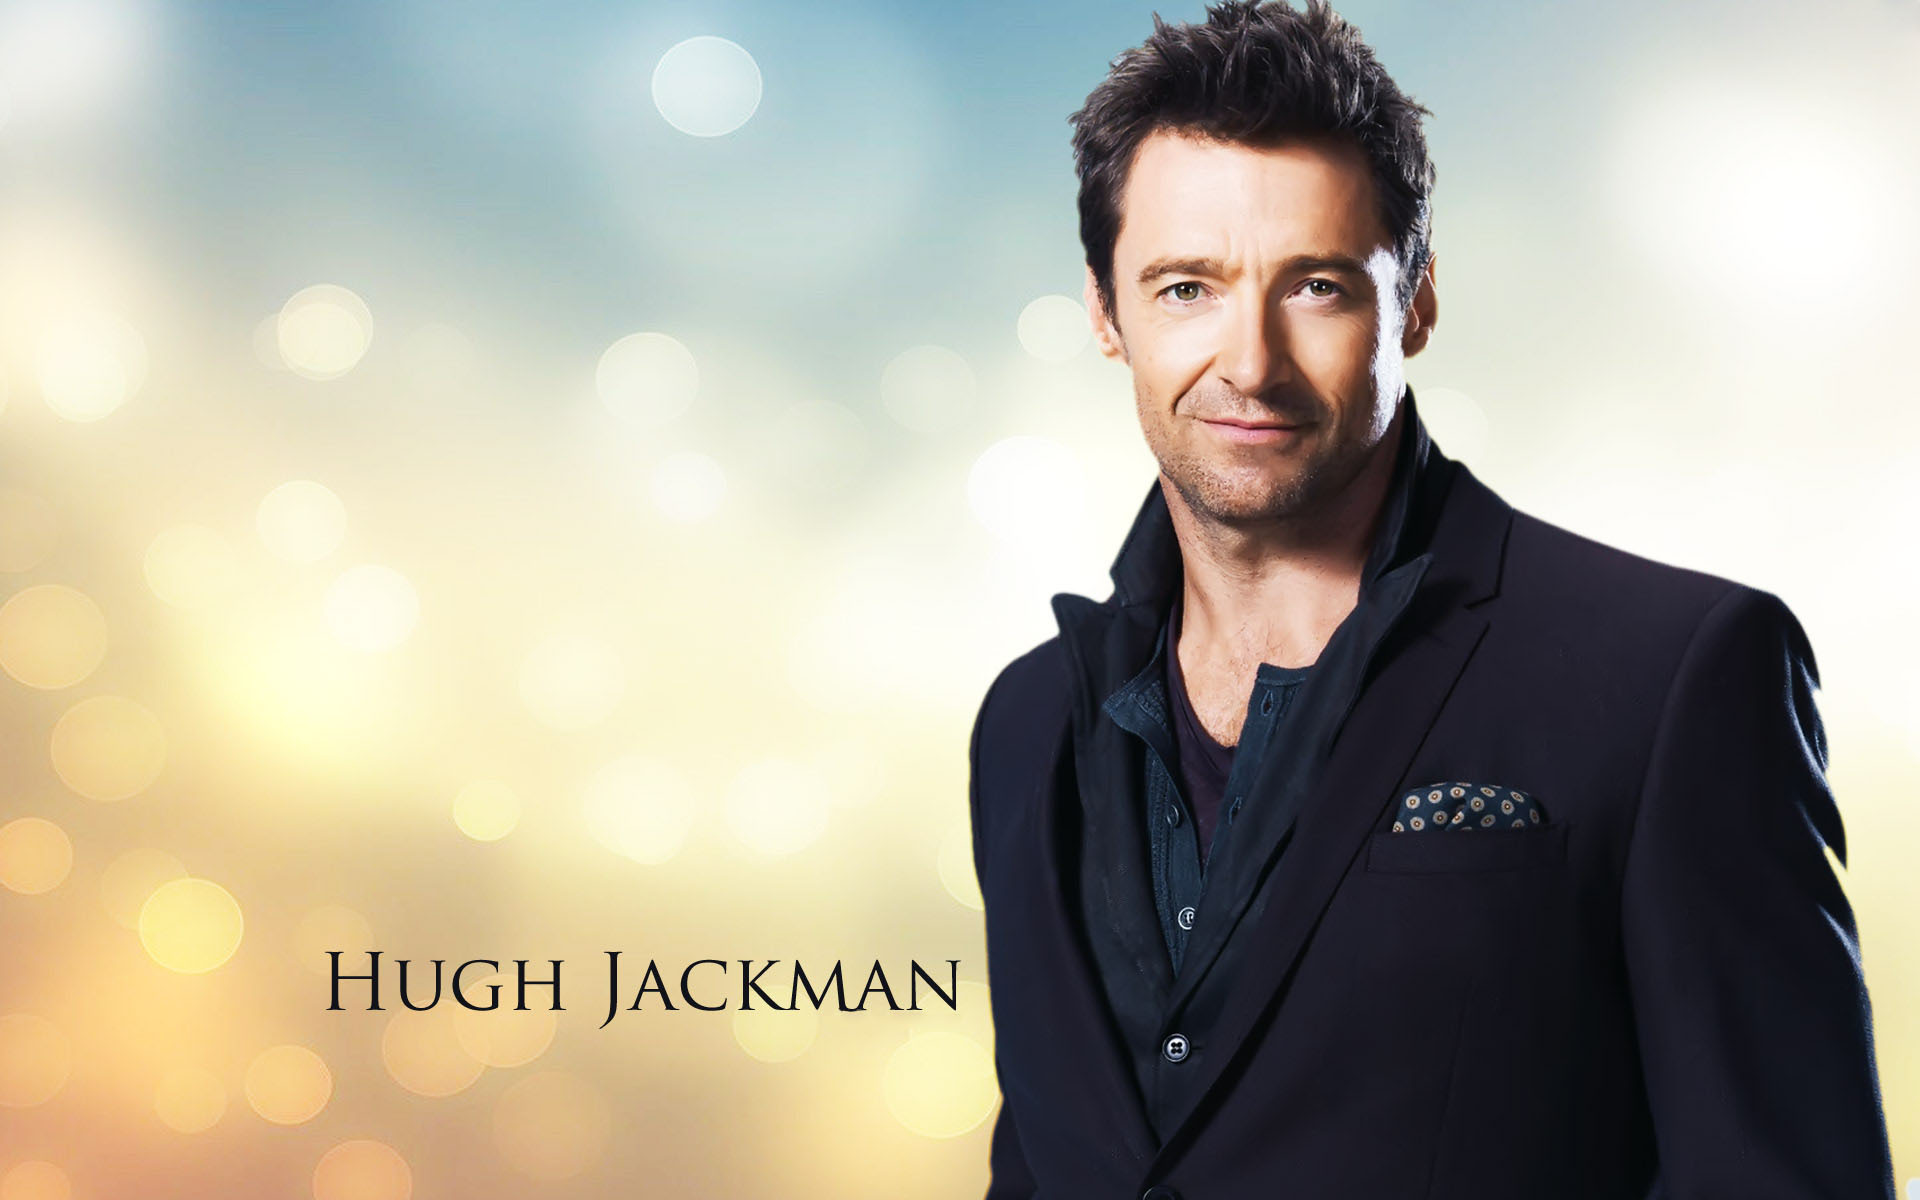 Free Download Hugh Jackman Wallpaper Wallpaper High Definition High Quality [1920x1200] For Your